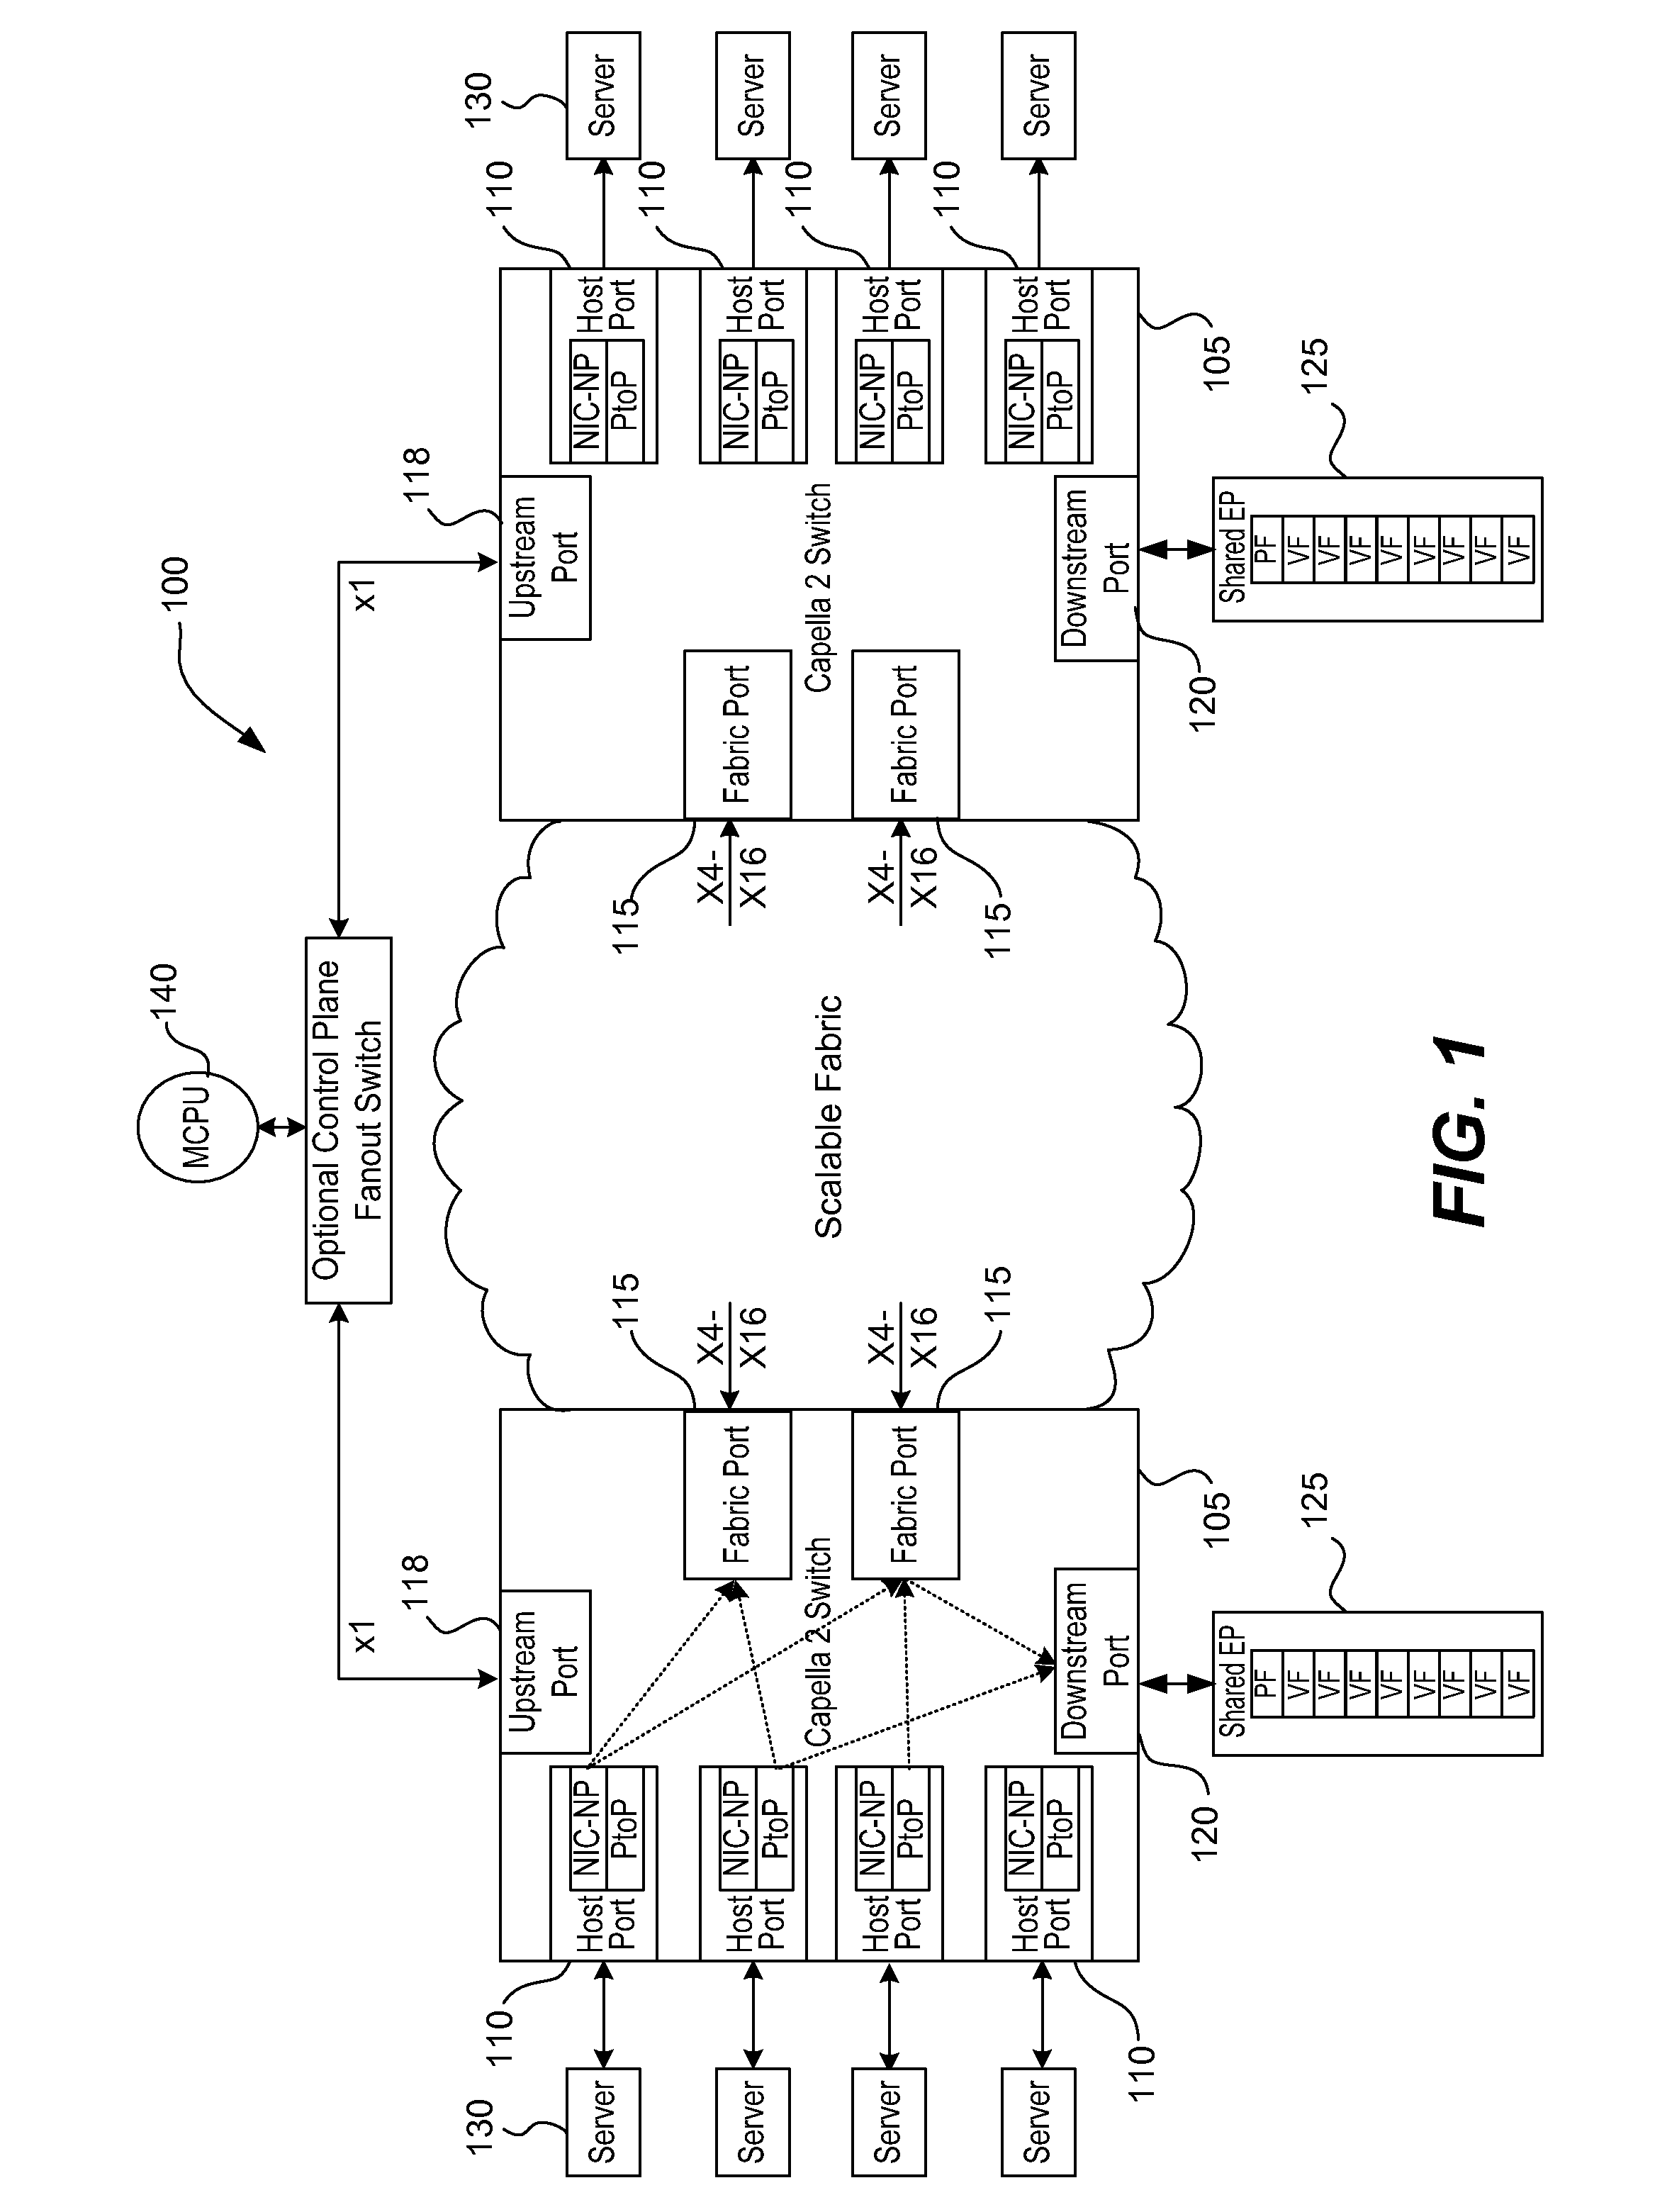 Multi-path id routing in a pcie express fabric environment